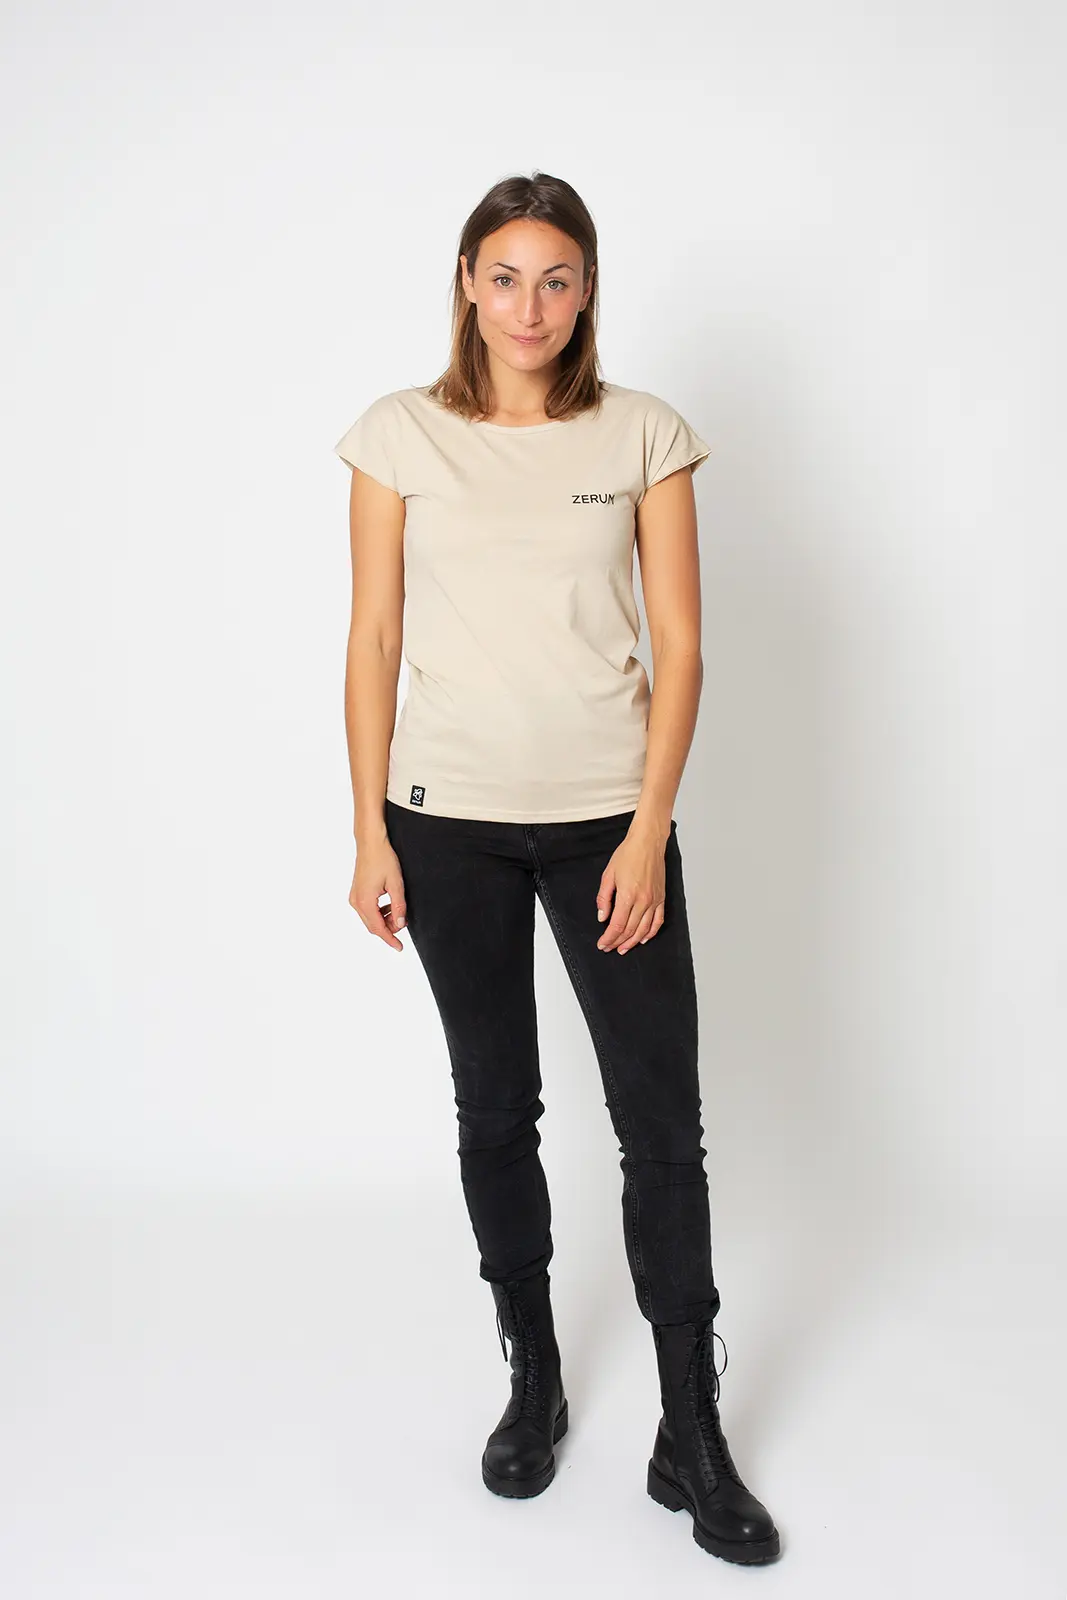 T-SHIRT LEA LINES NATURAL RAW